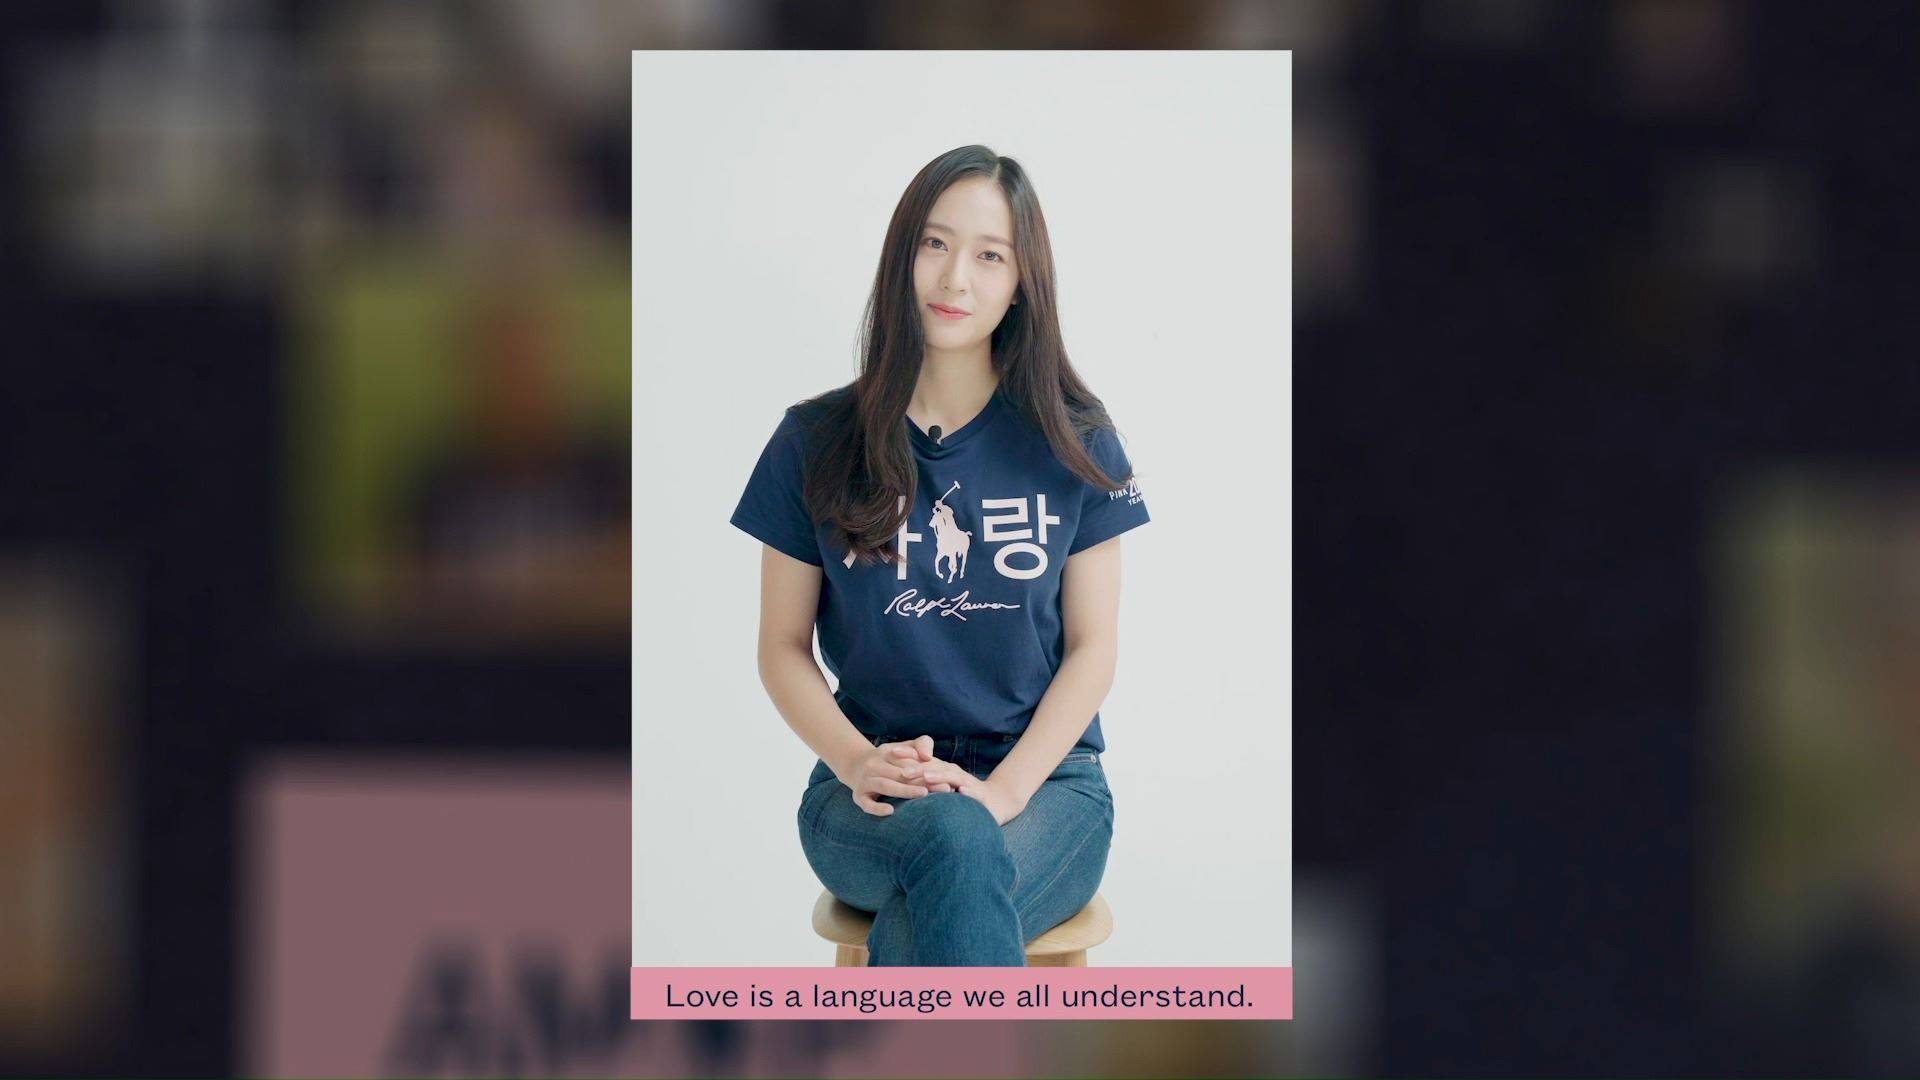 Pink Pony 2020: #KrystalJung, G.E.M. 鄧紫棋, #AiTominaga and Delta Goodrem For this year's campaign, we gathered global voices to send messages of love and share their journeys with cancer in celebration of the 20th anniversary of #PinkPony. Discover more Pink Pony cast member stories via the link:...